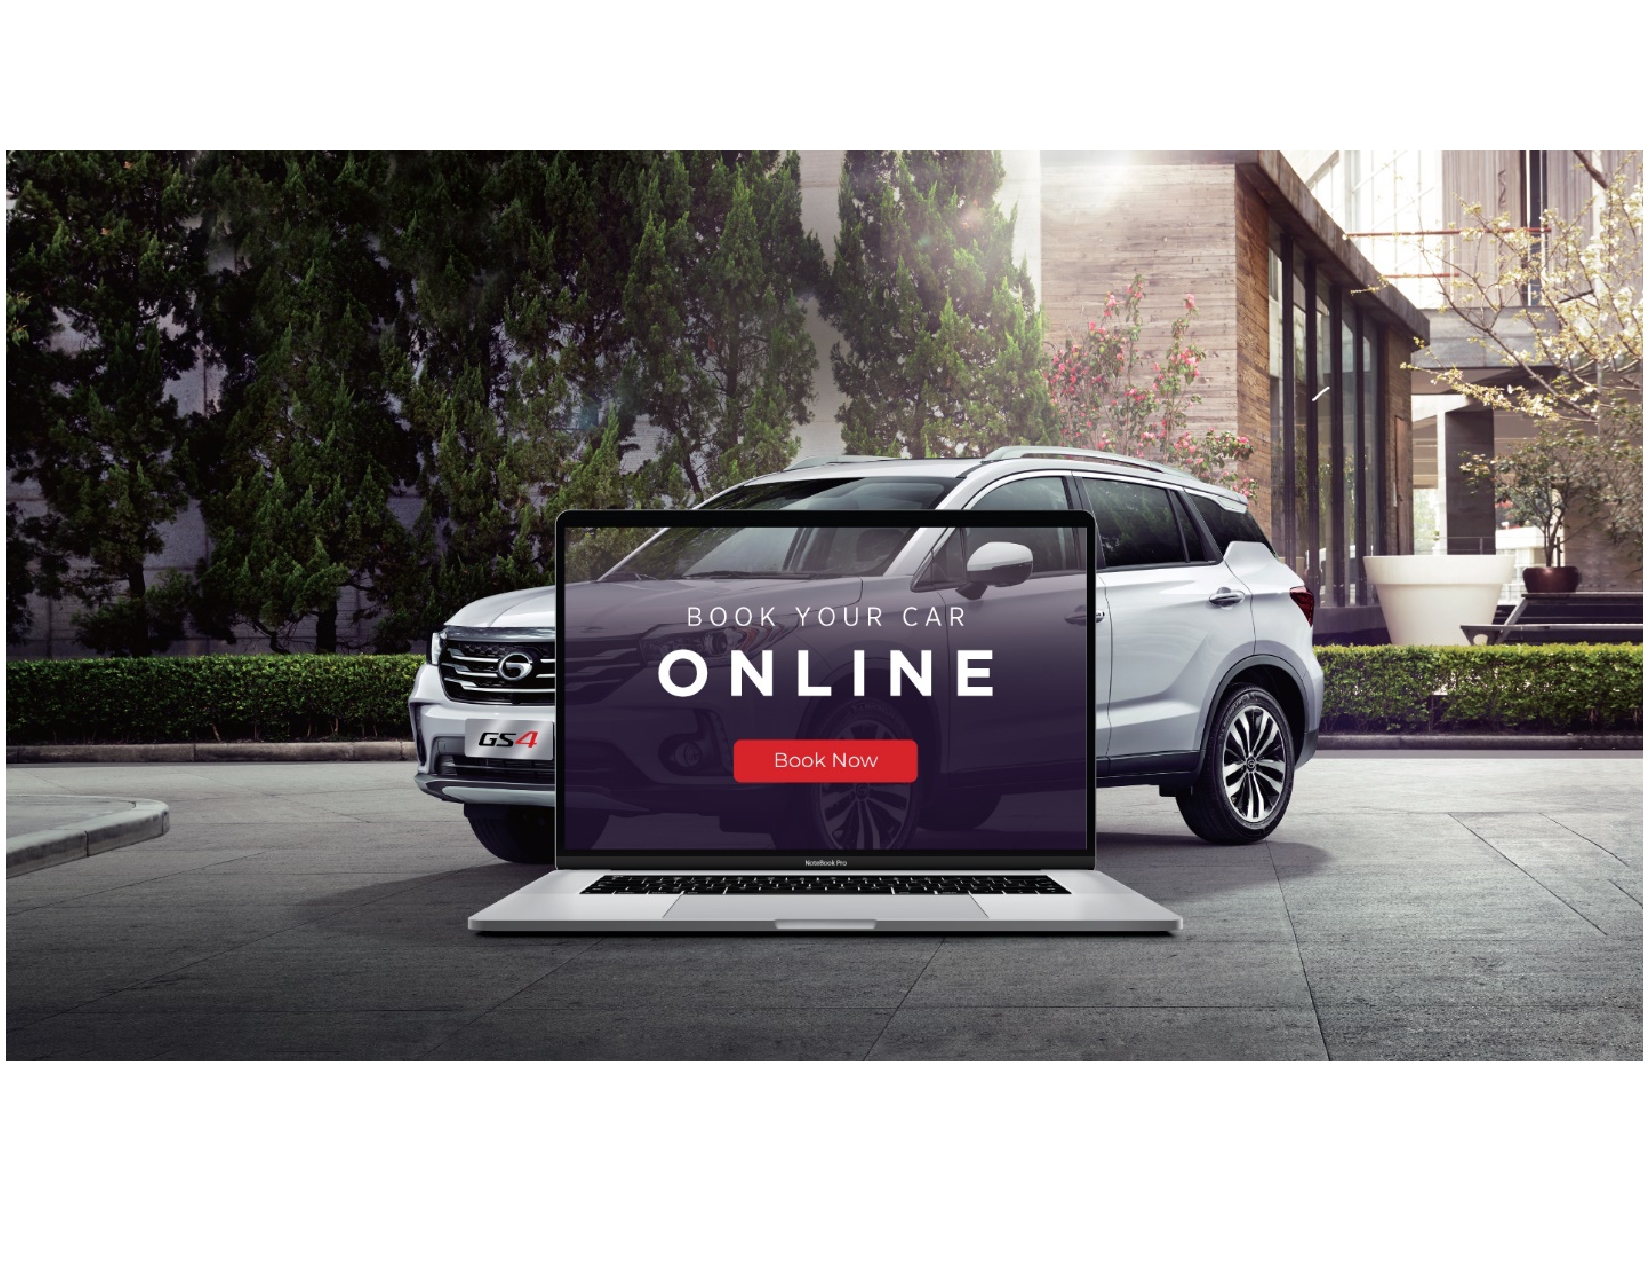 Gargash Launches GAC Motor’s First E-commerce Platform In The World